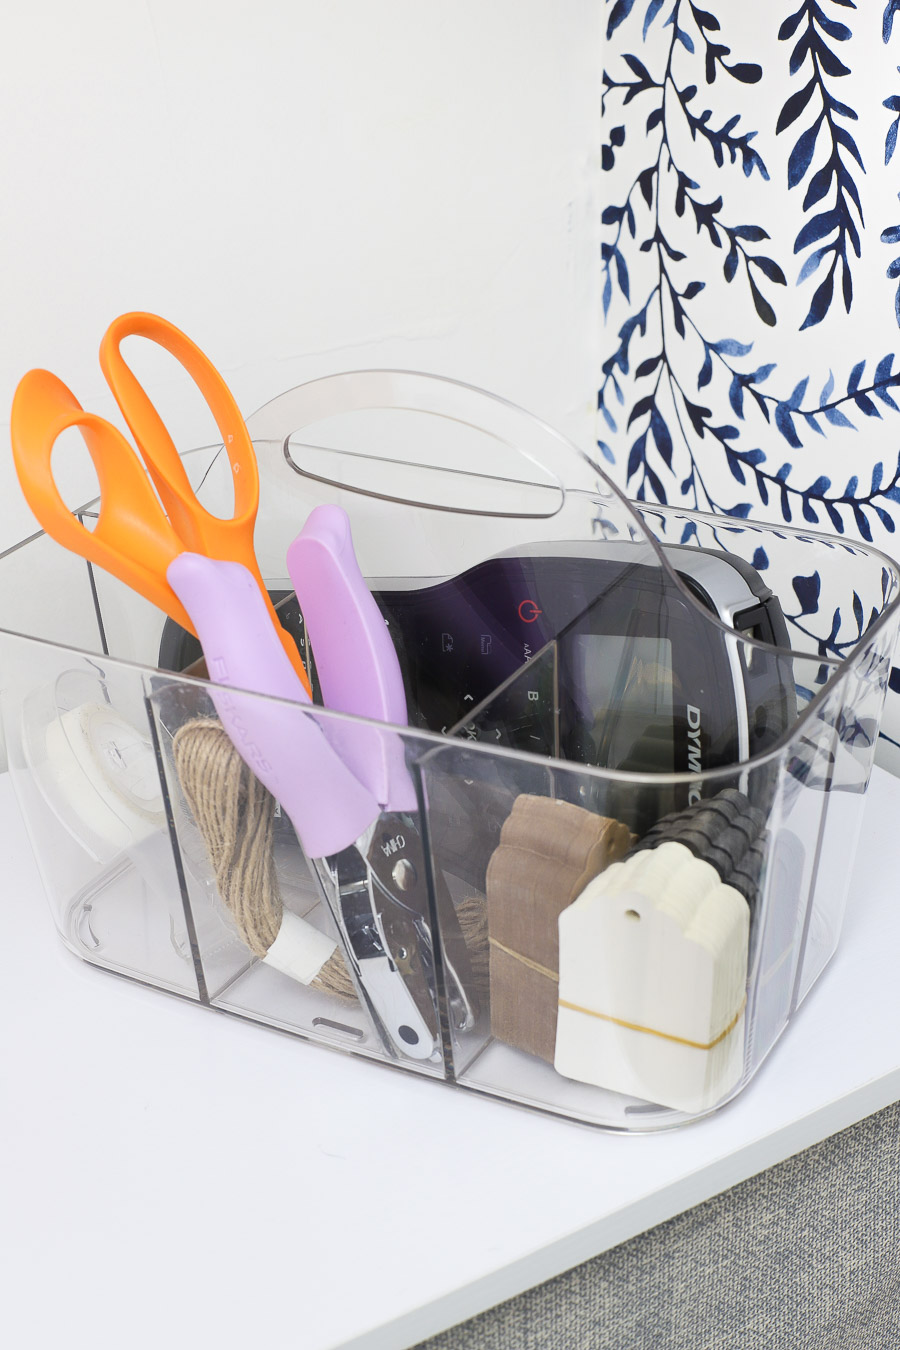 This acrylic tote is the perfect grab and go item to help keep you organized!